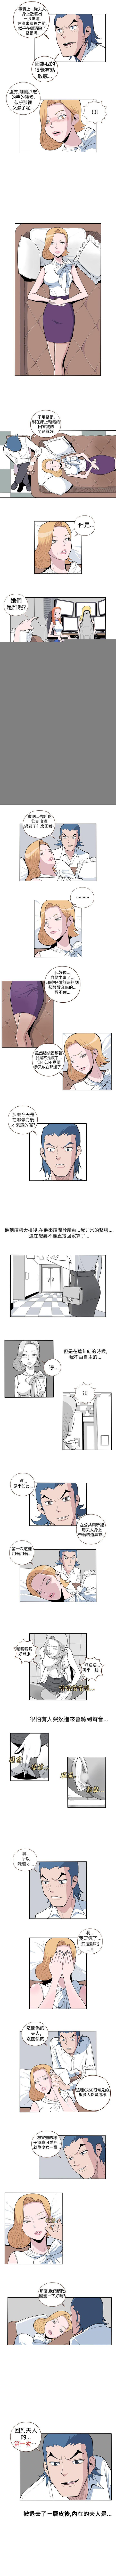 Doctor Sex 淫亂魔鬼 1-29 Egypt - Page 4